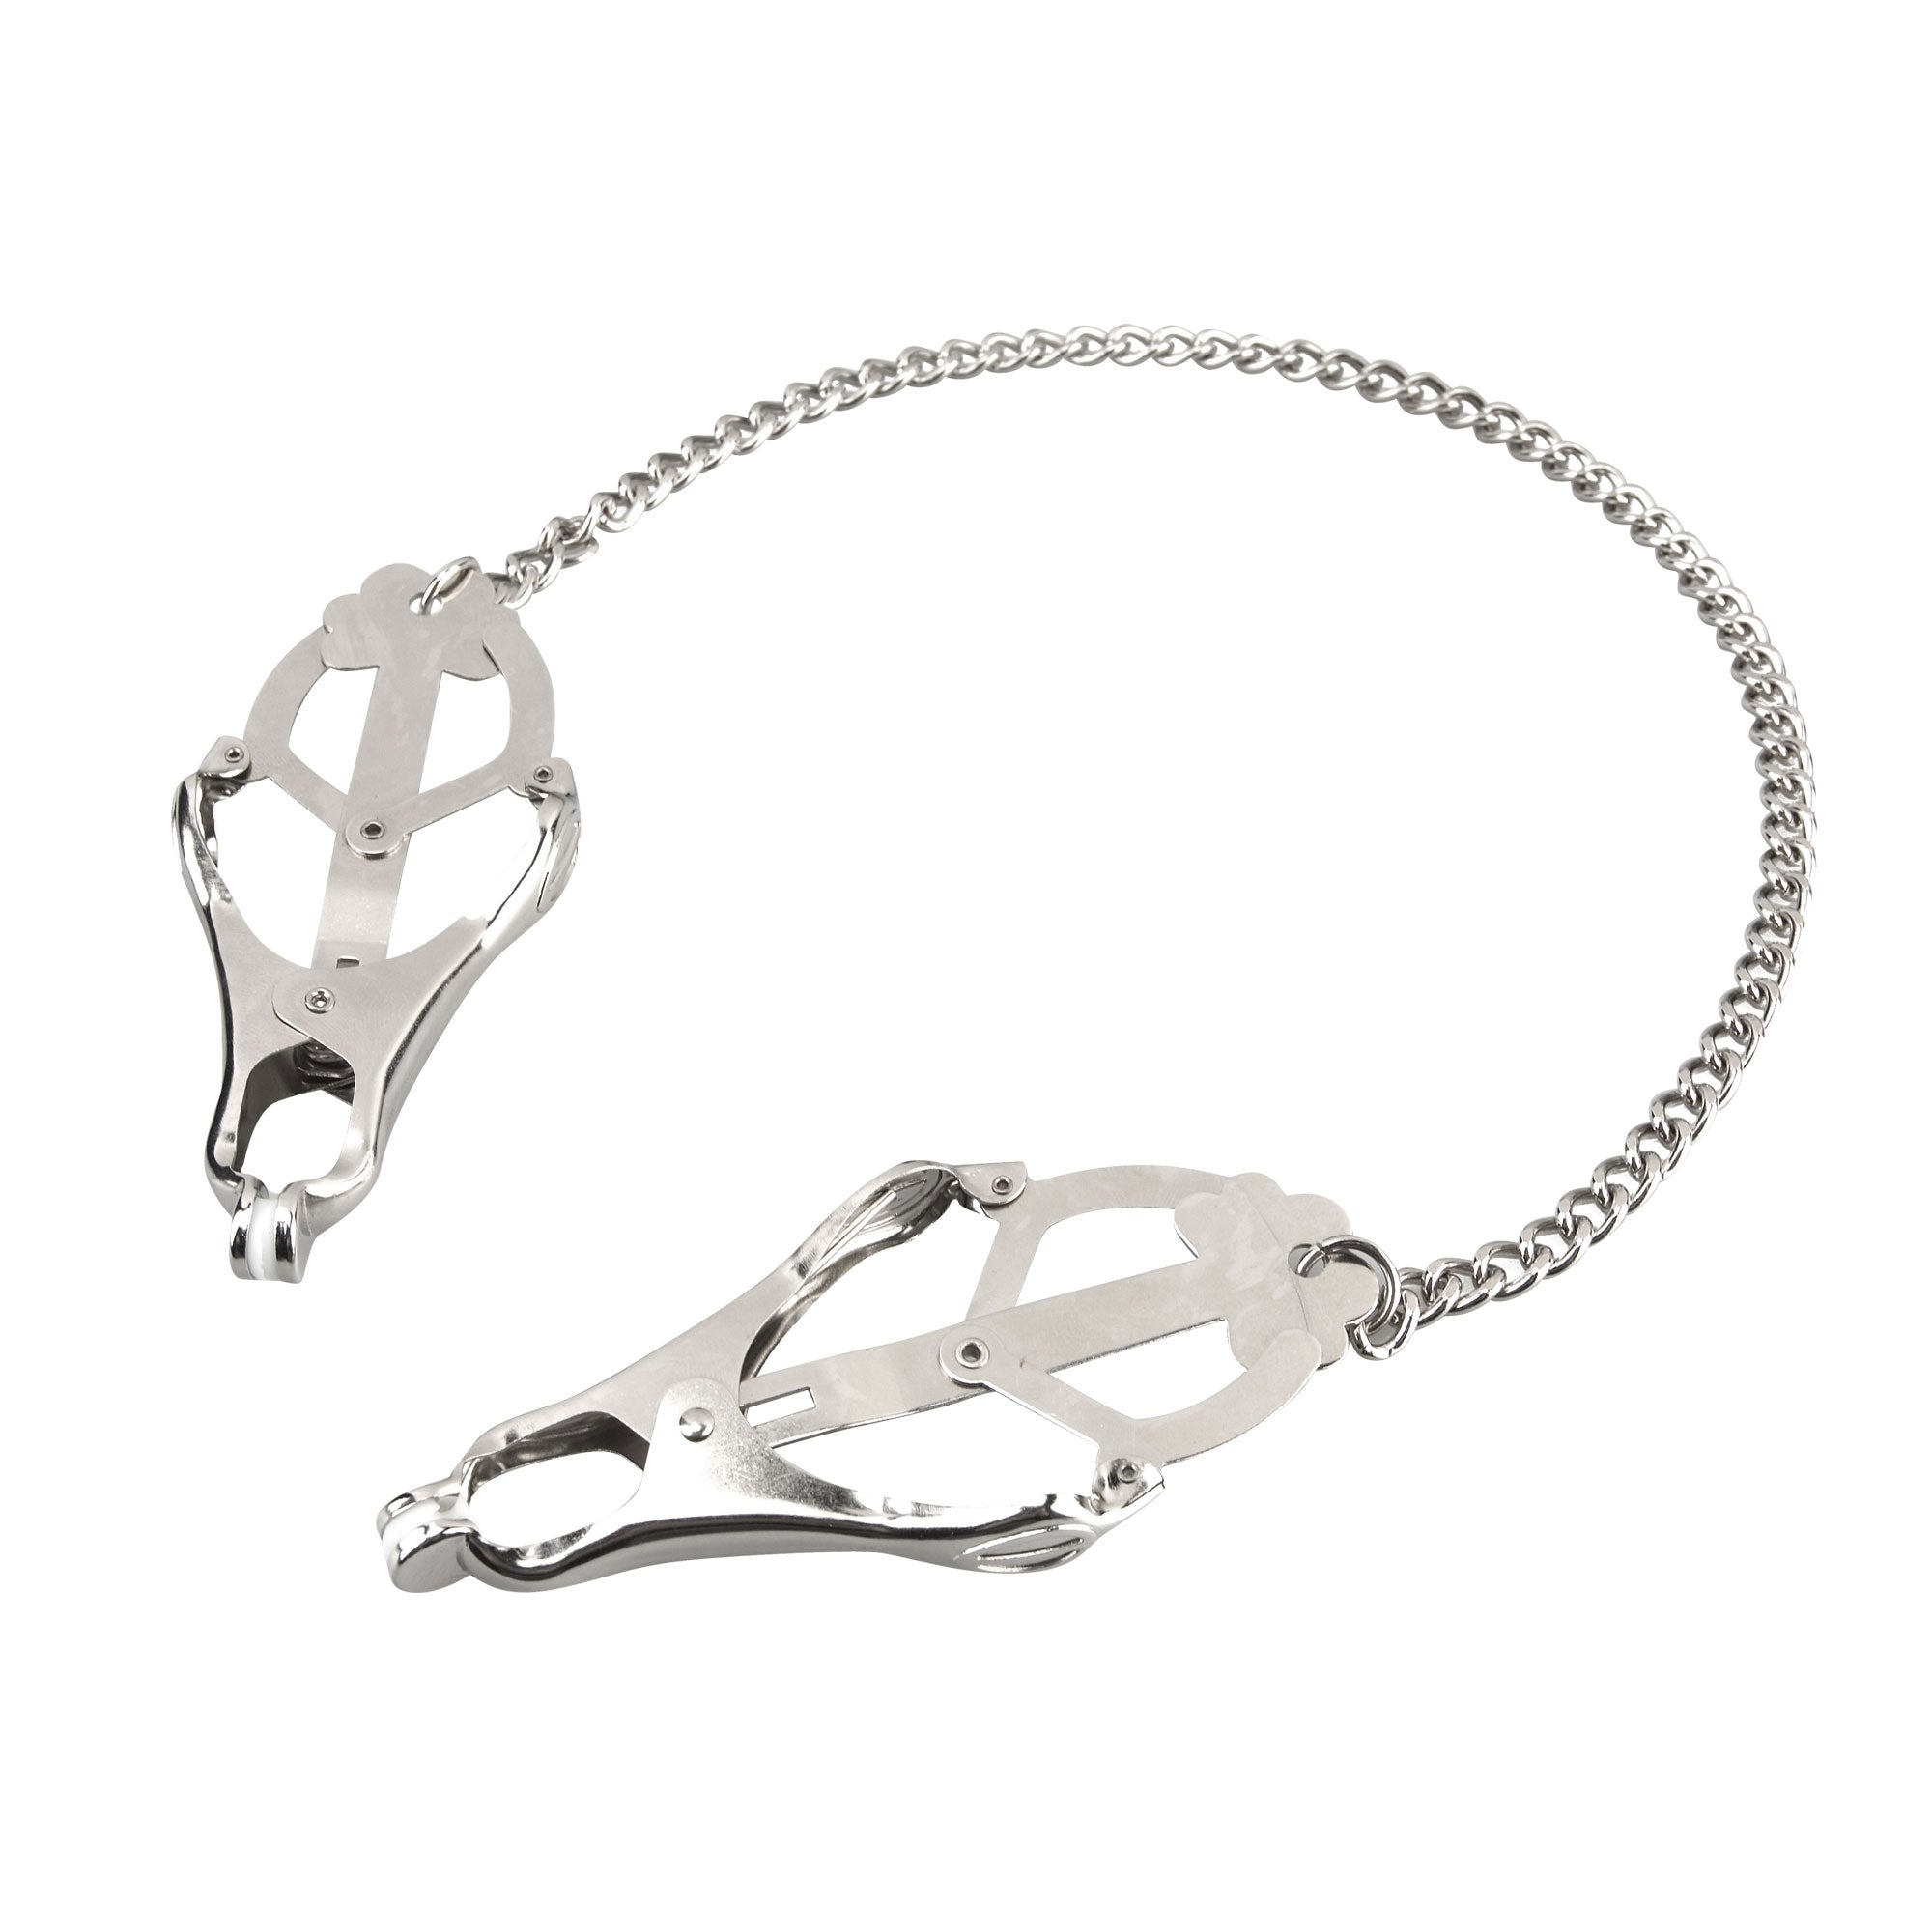 Lux Fetish Japanese Clover Nipple Clamps with Chain at glastoy.com